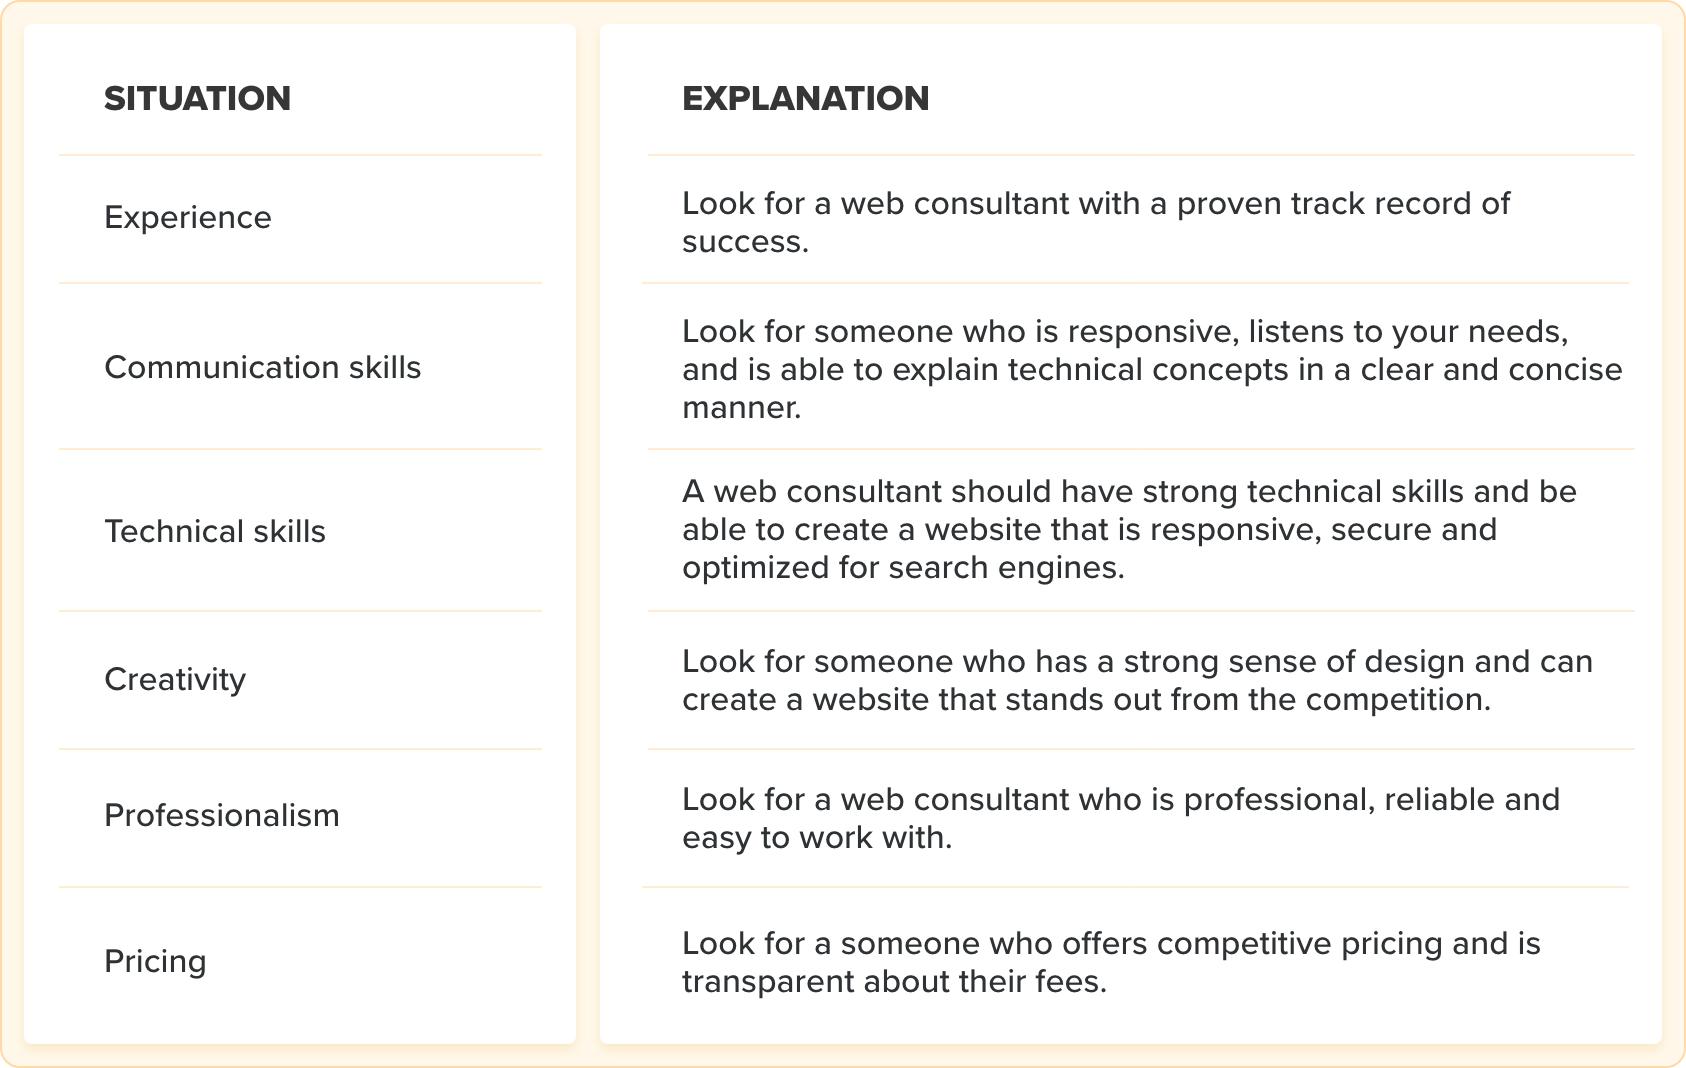 What to Look for in a Web Consultant